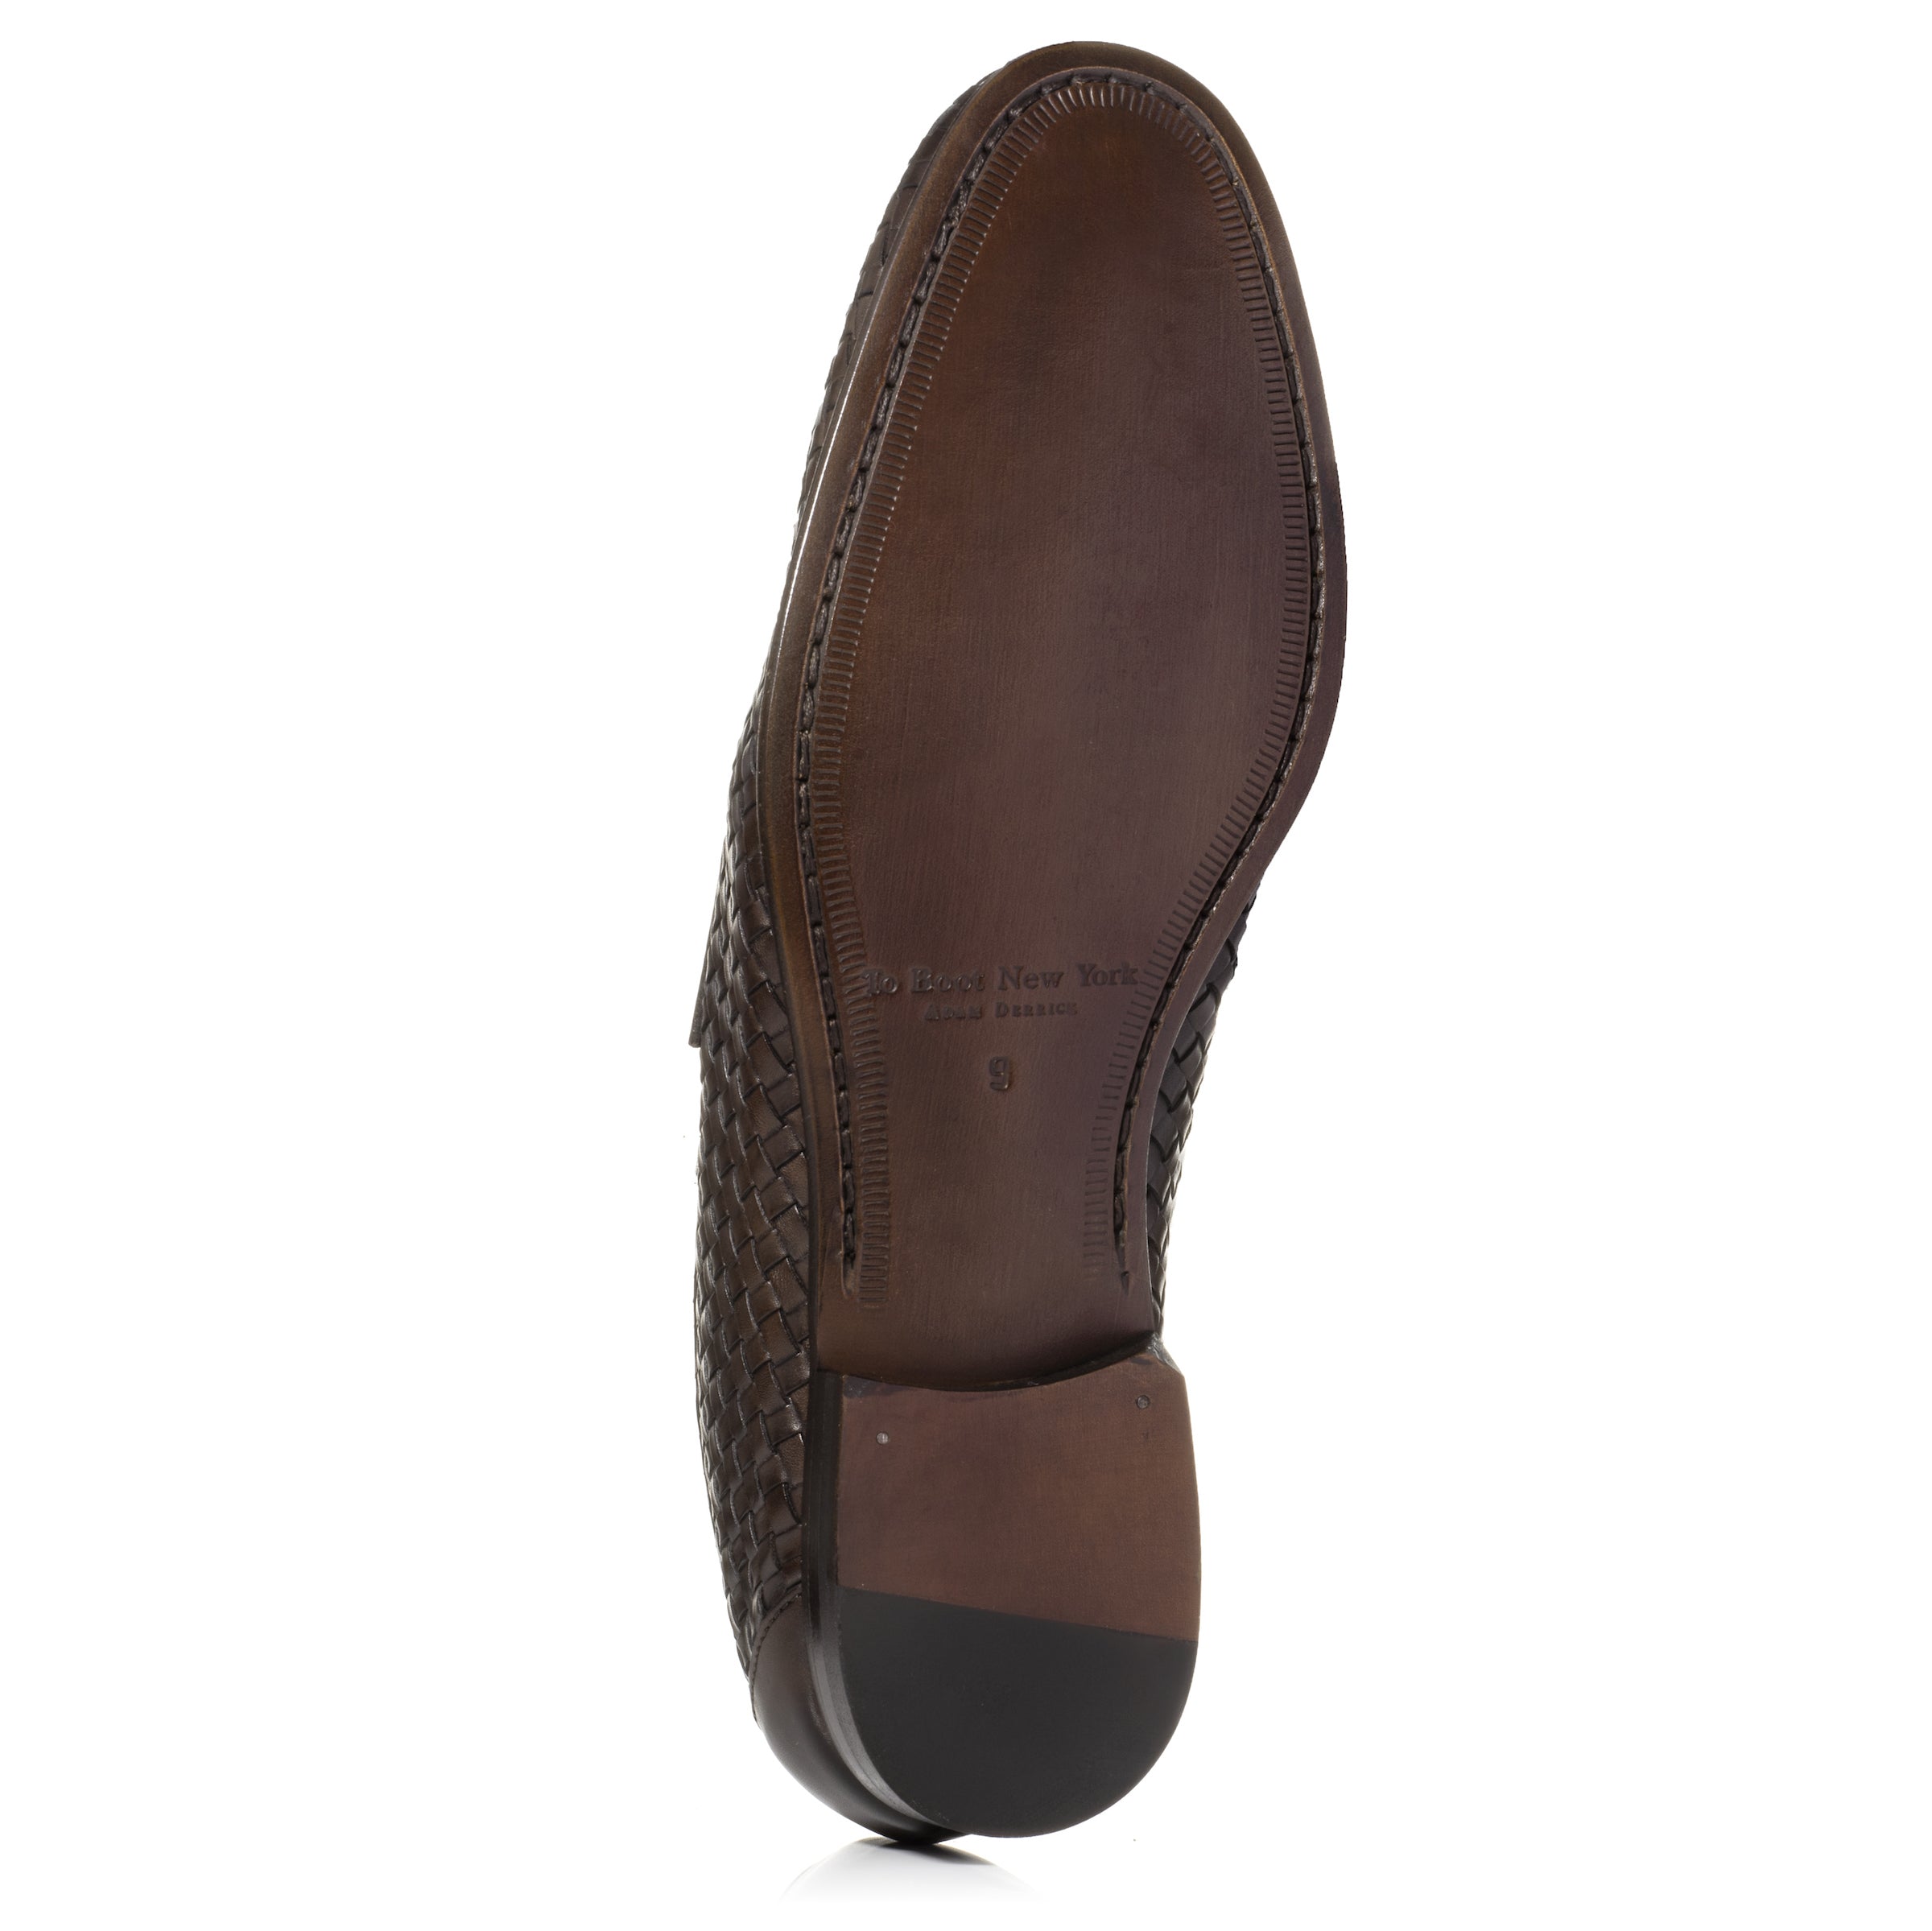 Zenith Brown Woven Leather Loafer